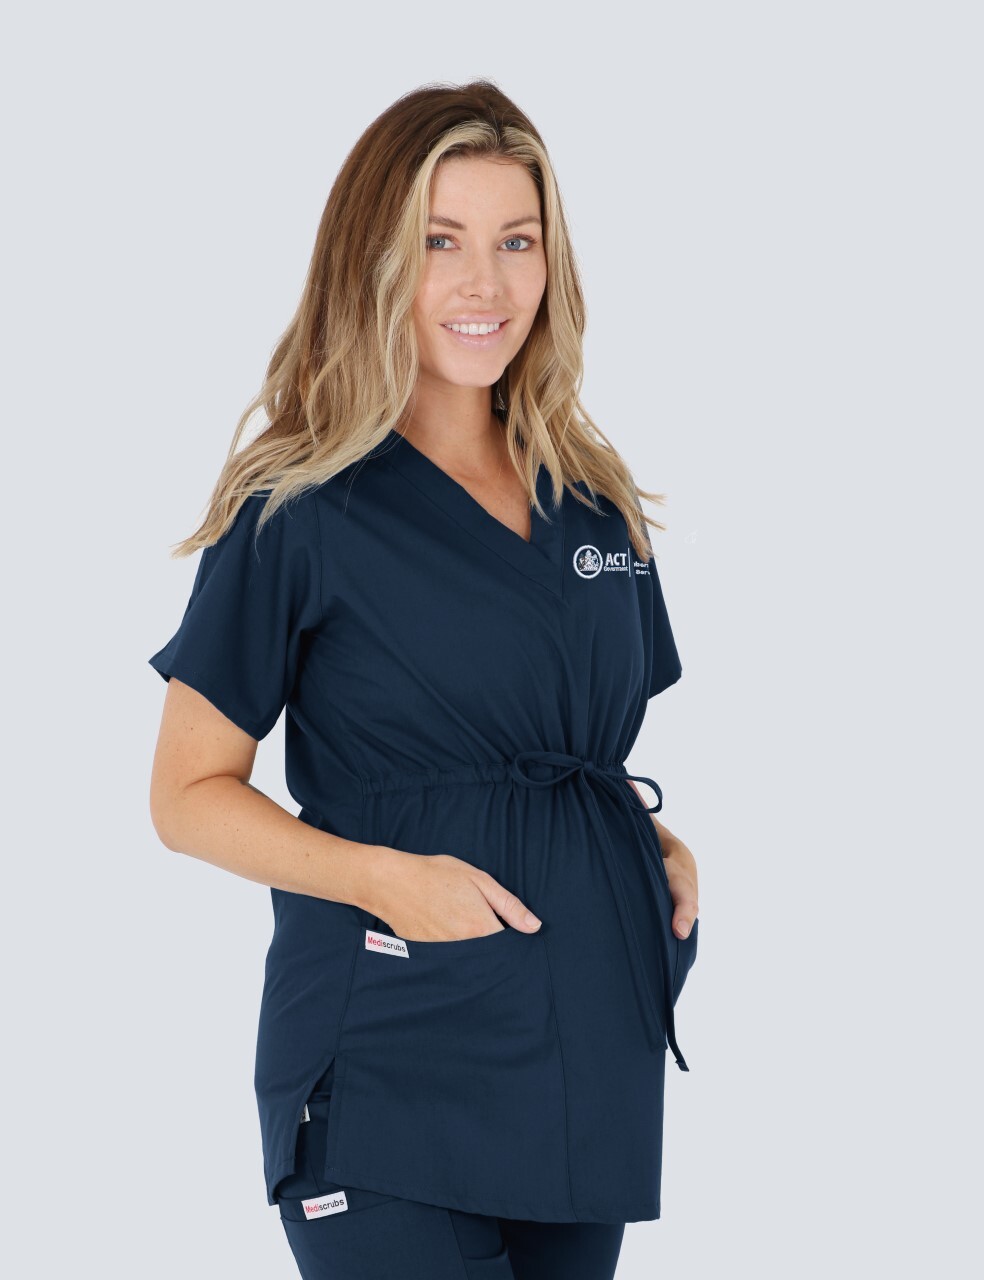 Canberra Hospital (ACT) - Acute Social Work (Maternity Scrub Top in Navy incl Logos)